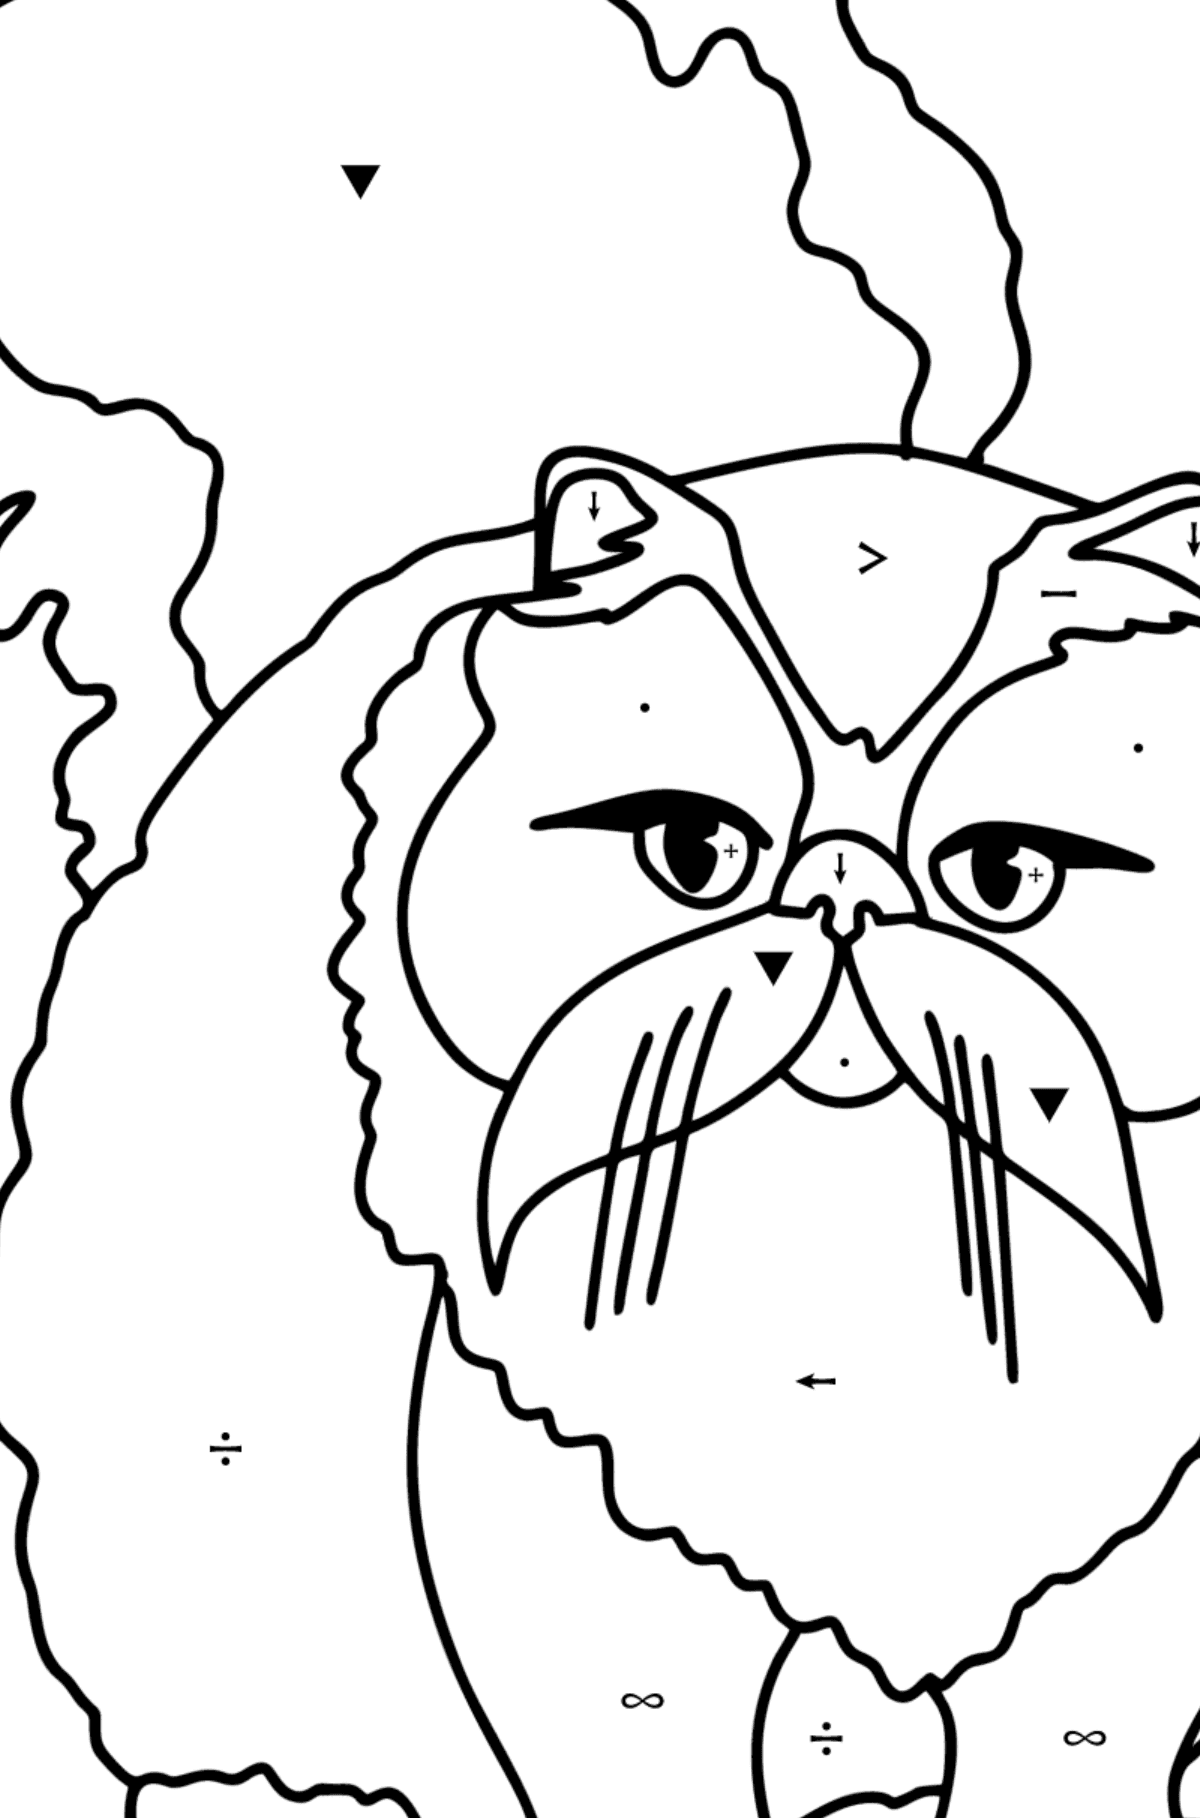 Persian Cat coloring page - Coloring by Symbols for Kids